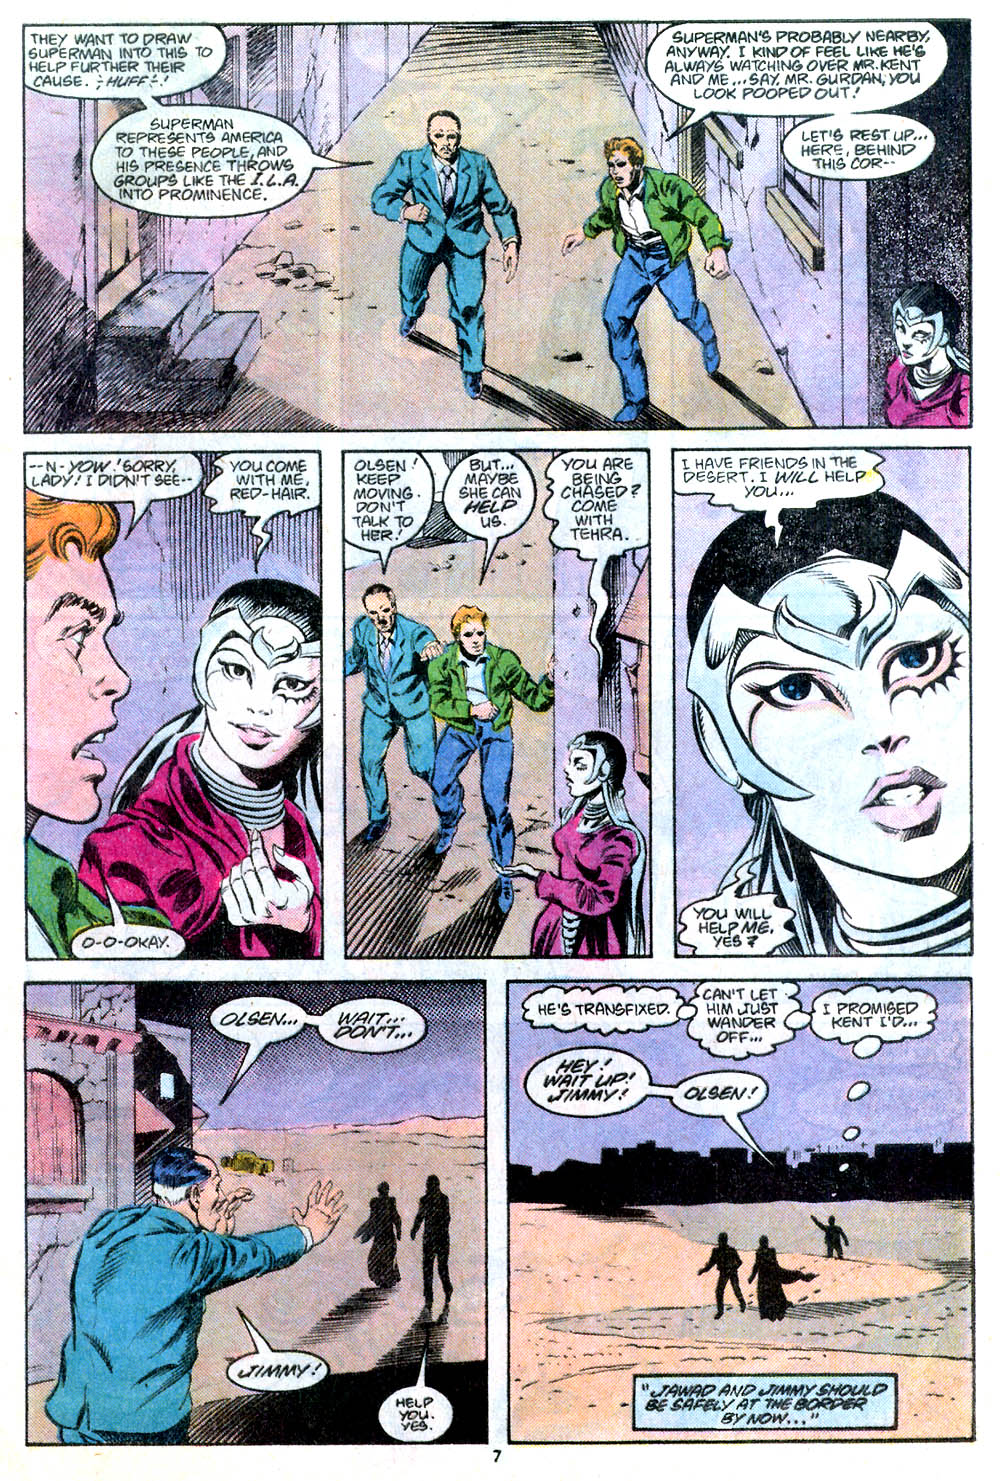 Adventures of Superman (1987) 443 Page 7